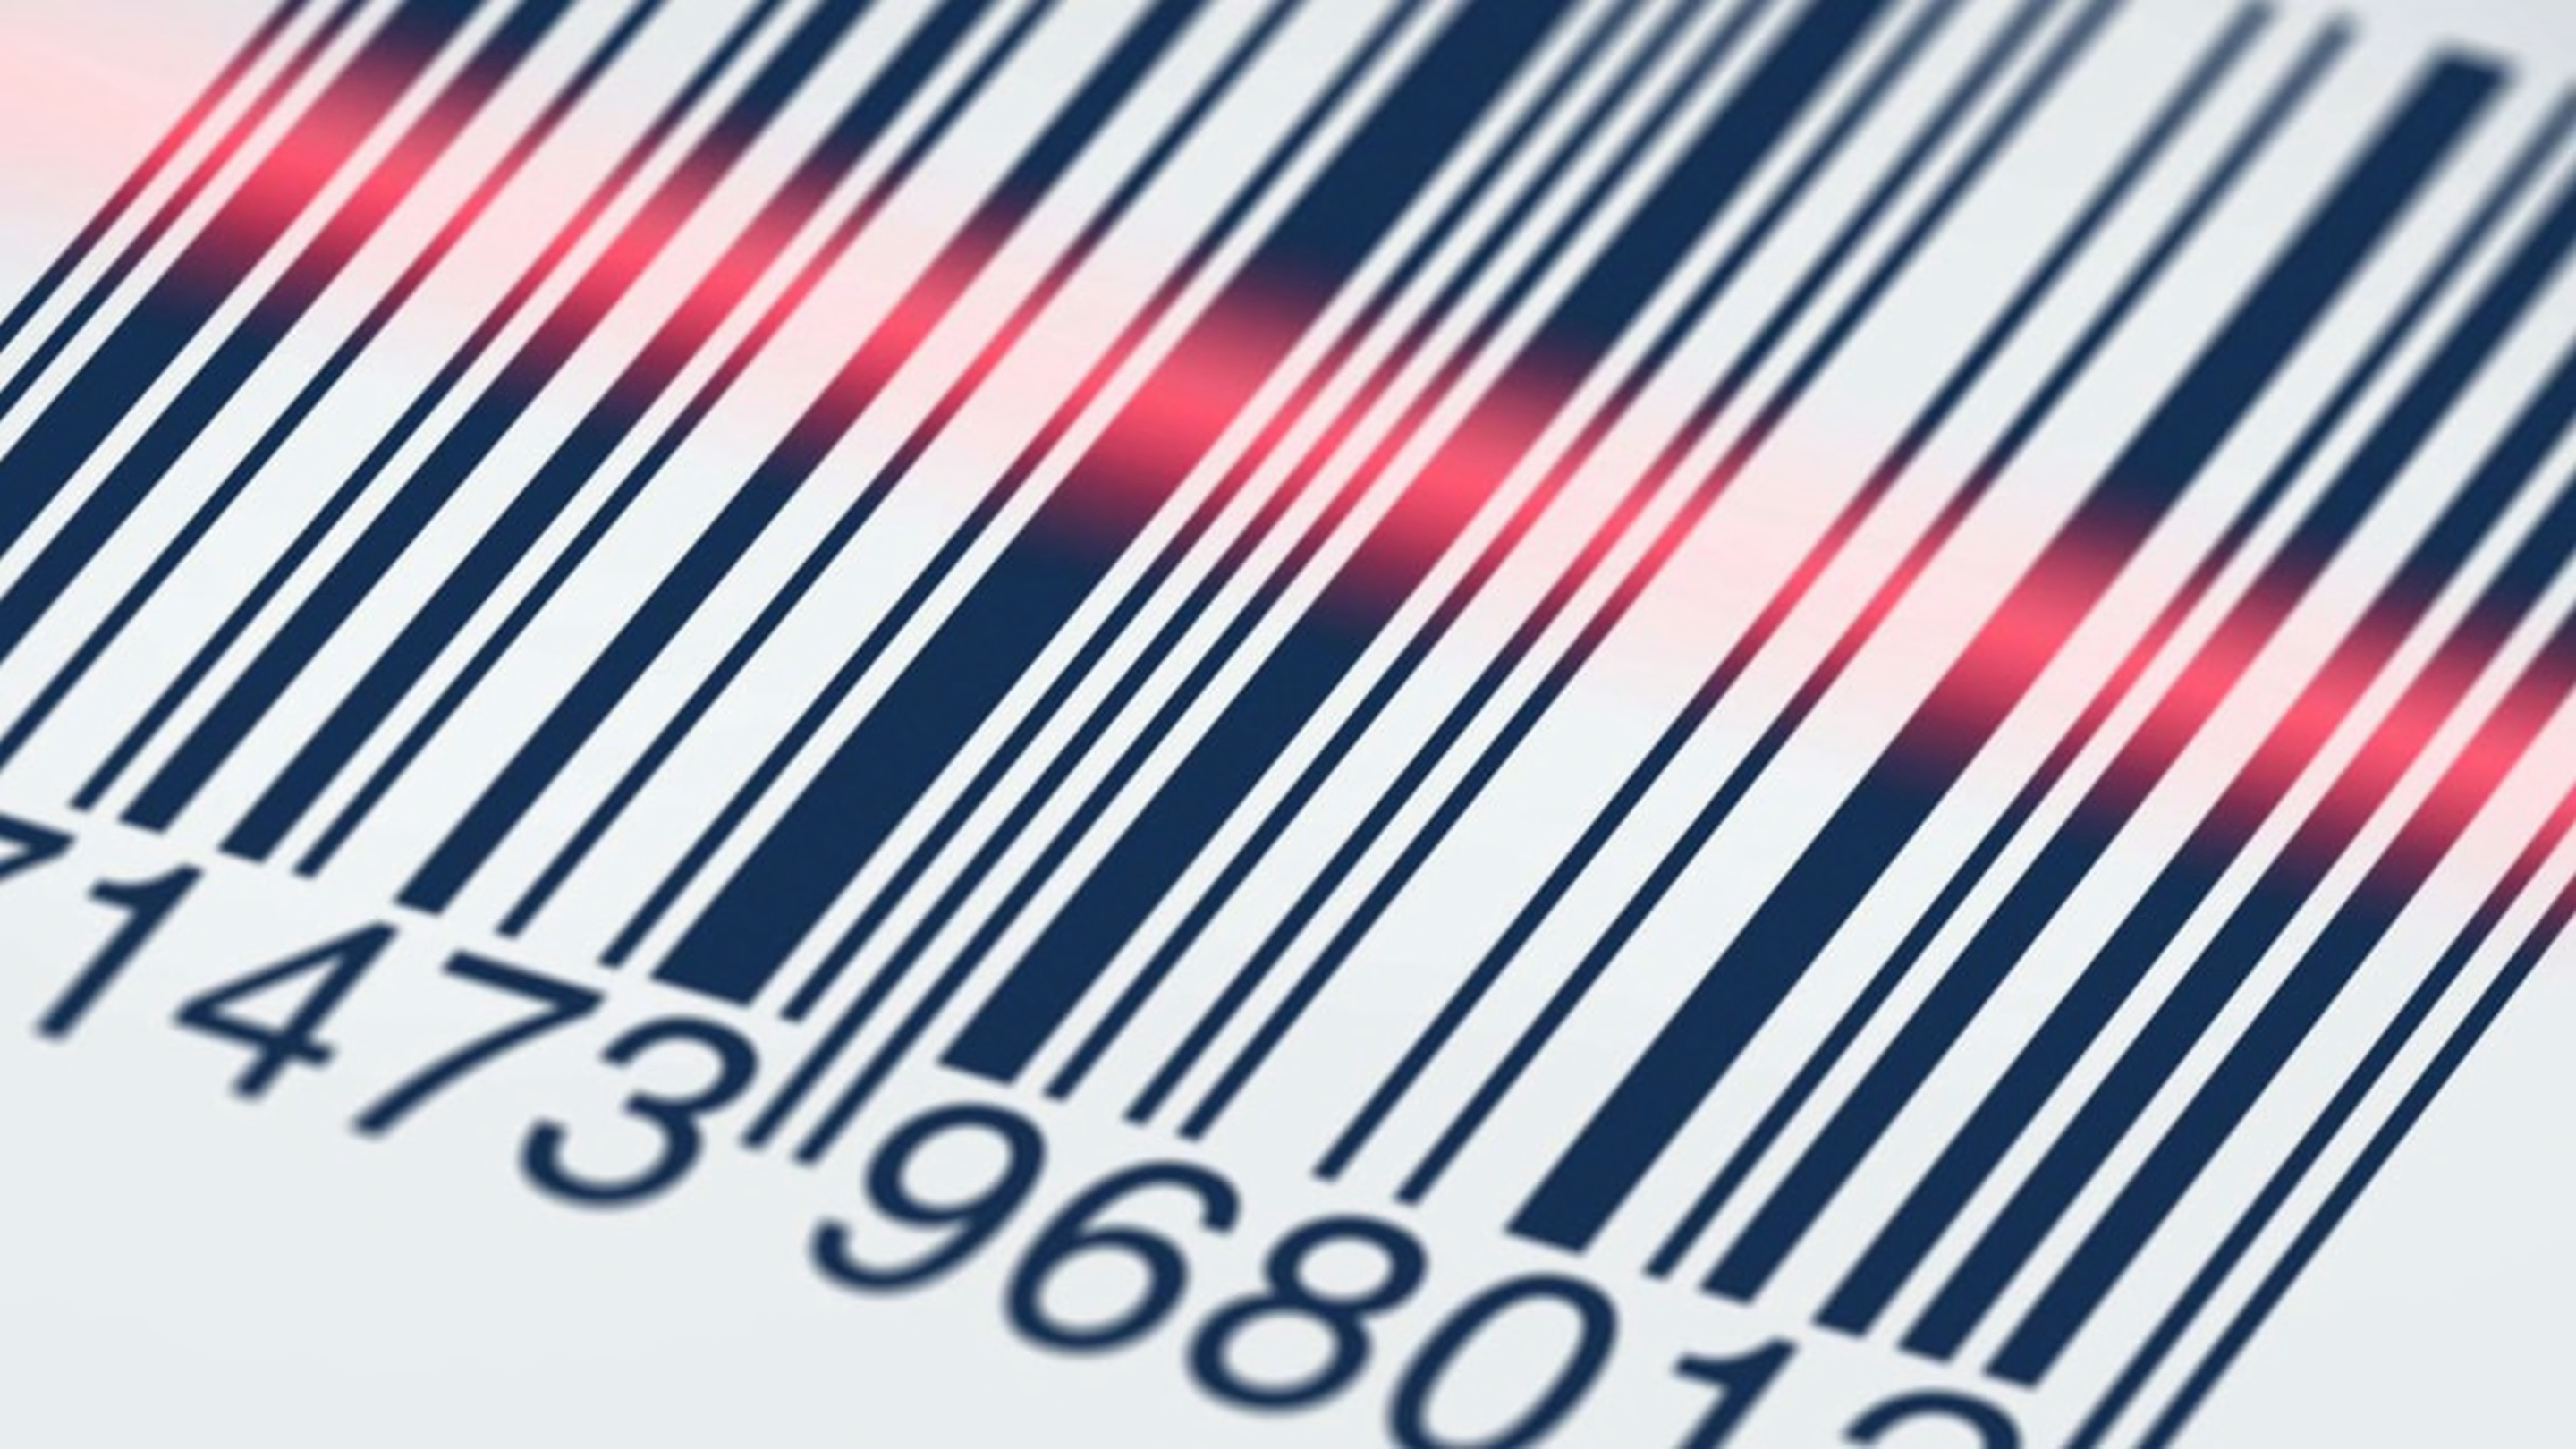 What Do the Numbers on Barcodes Mean?